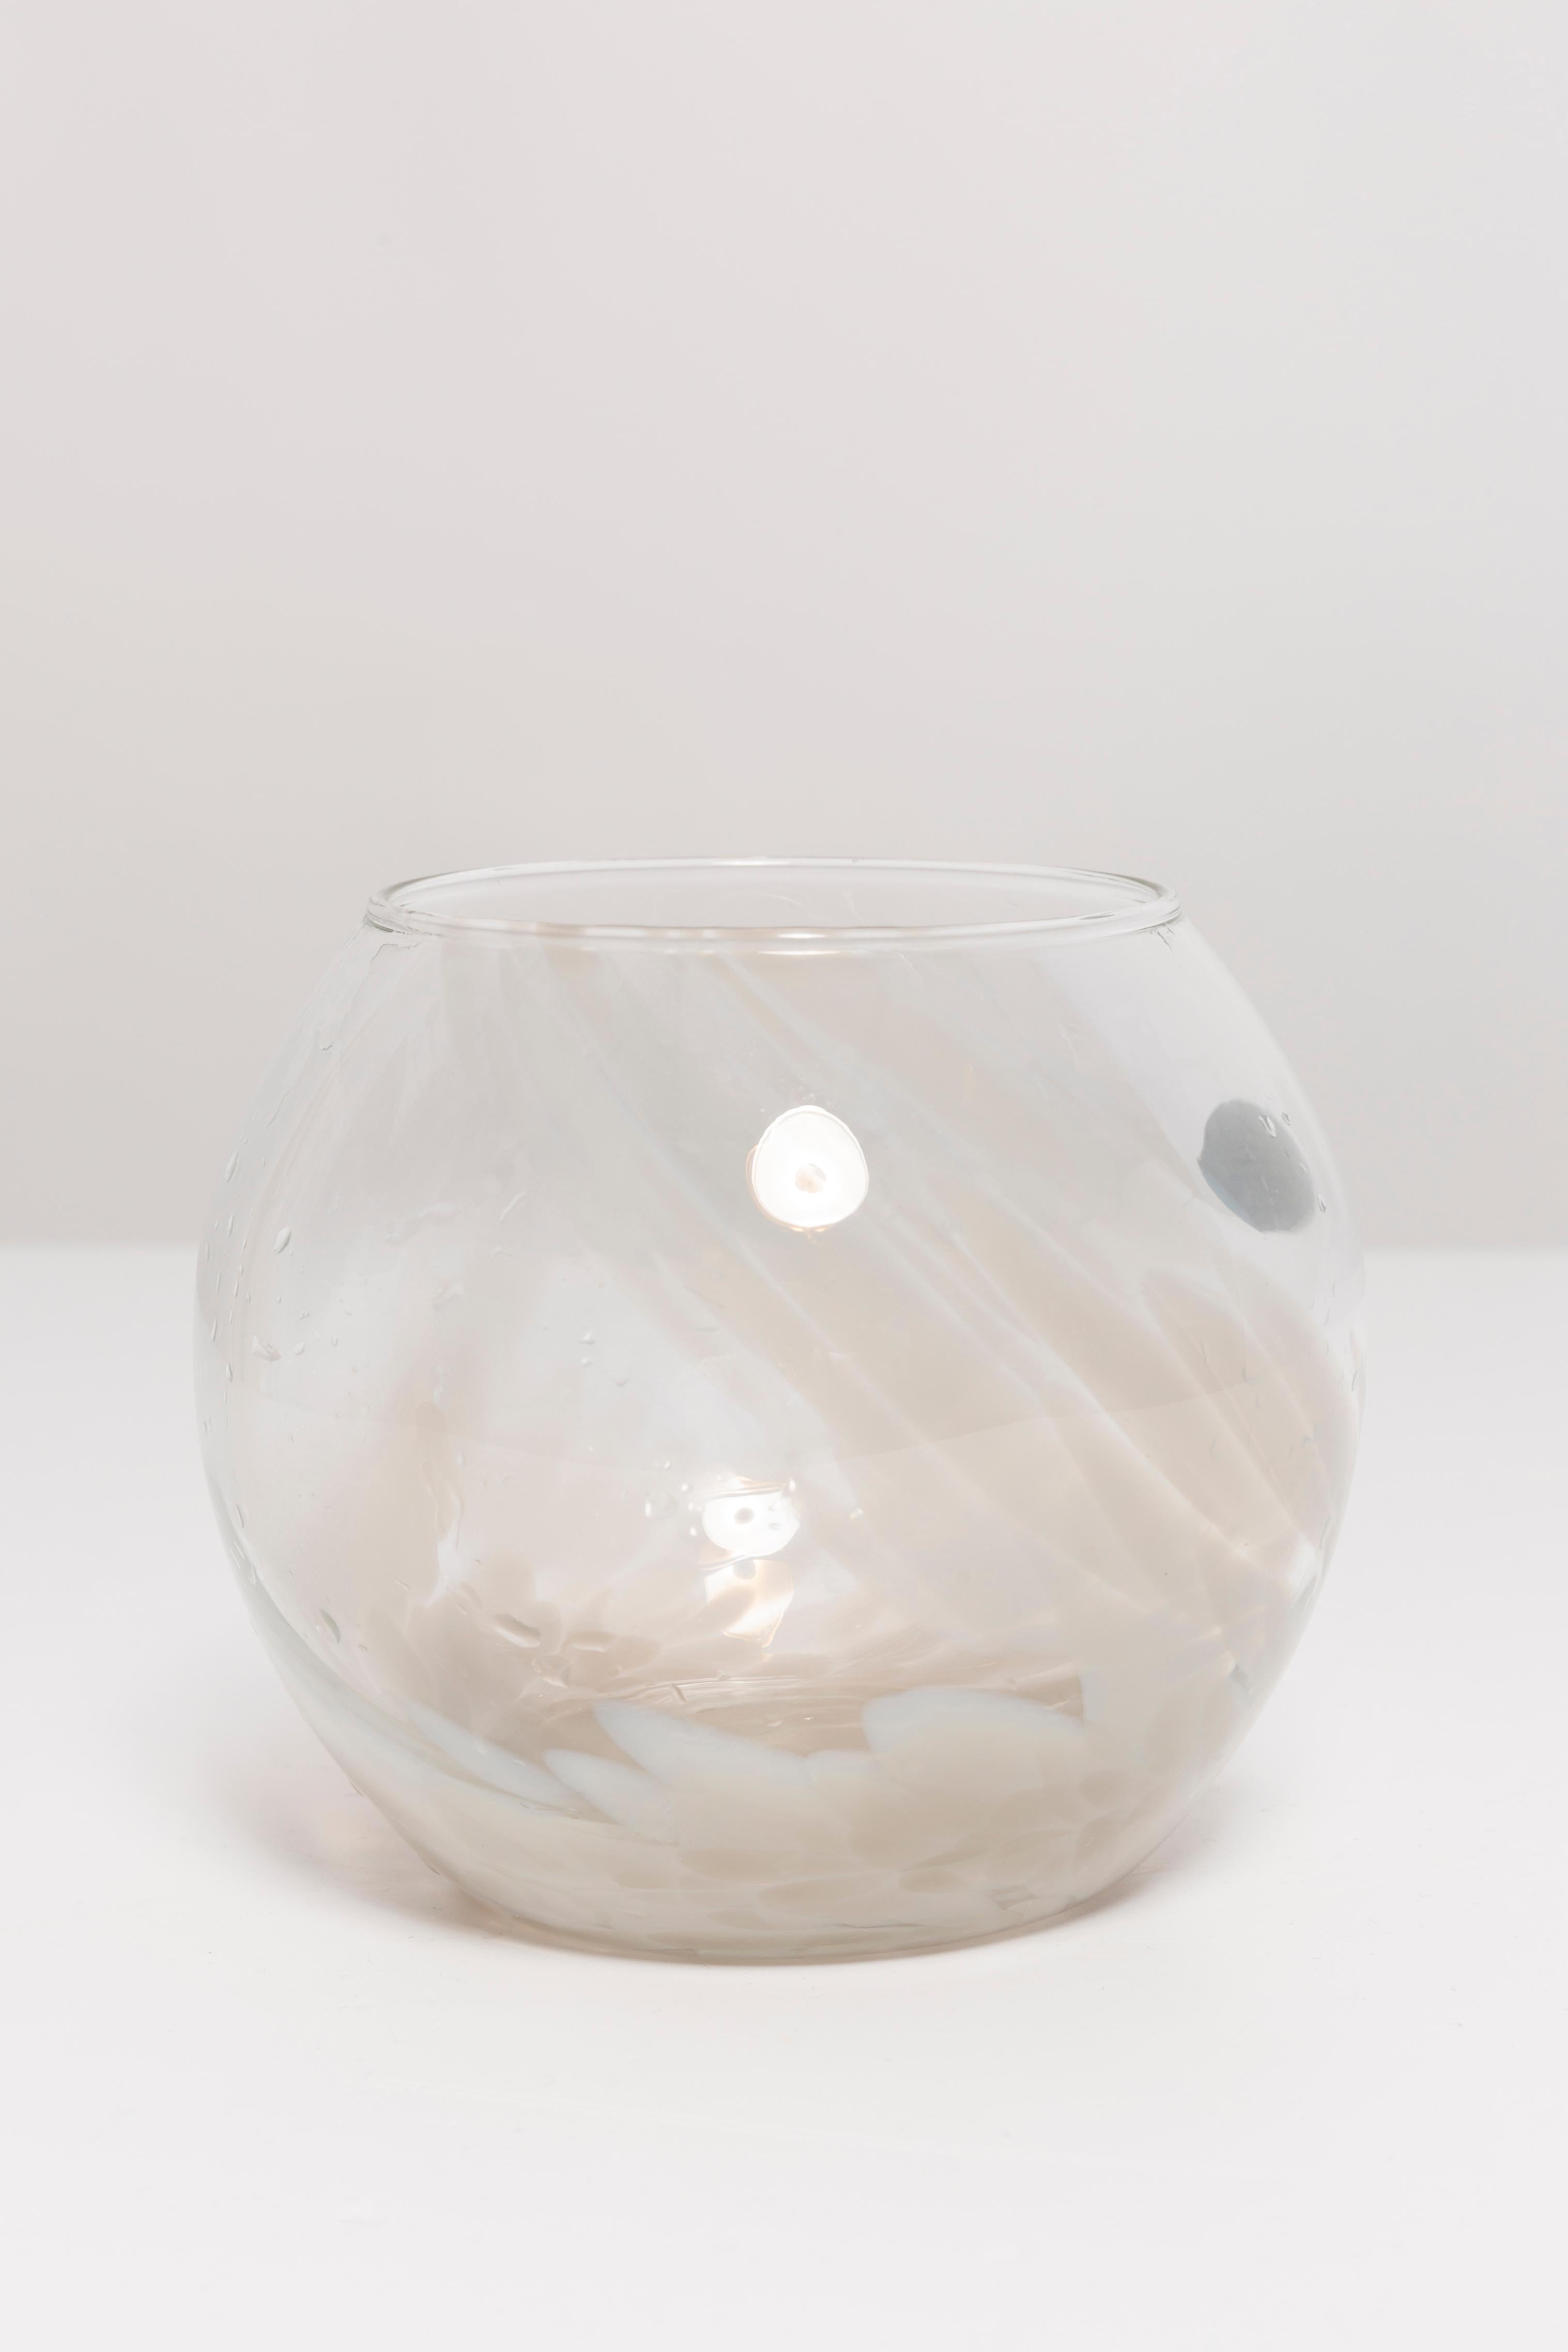 Mid-Century Modern Vintage White and Beige Decorative Murano Glass Mini Vase, Italy, 1960s For Sale